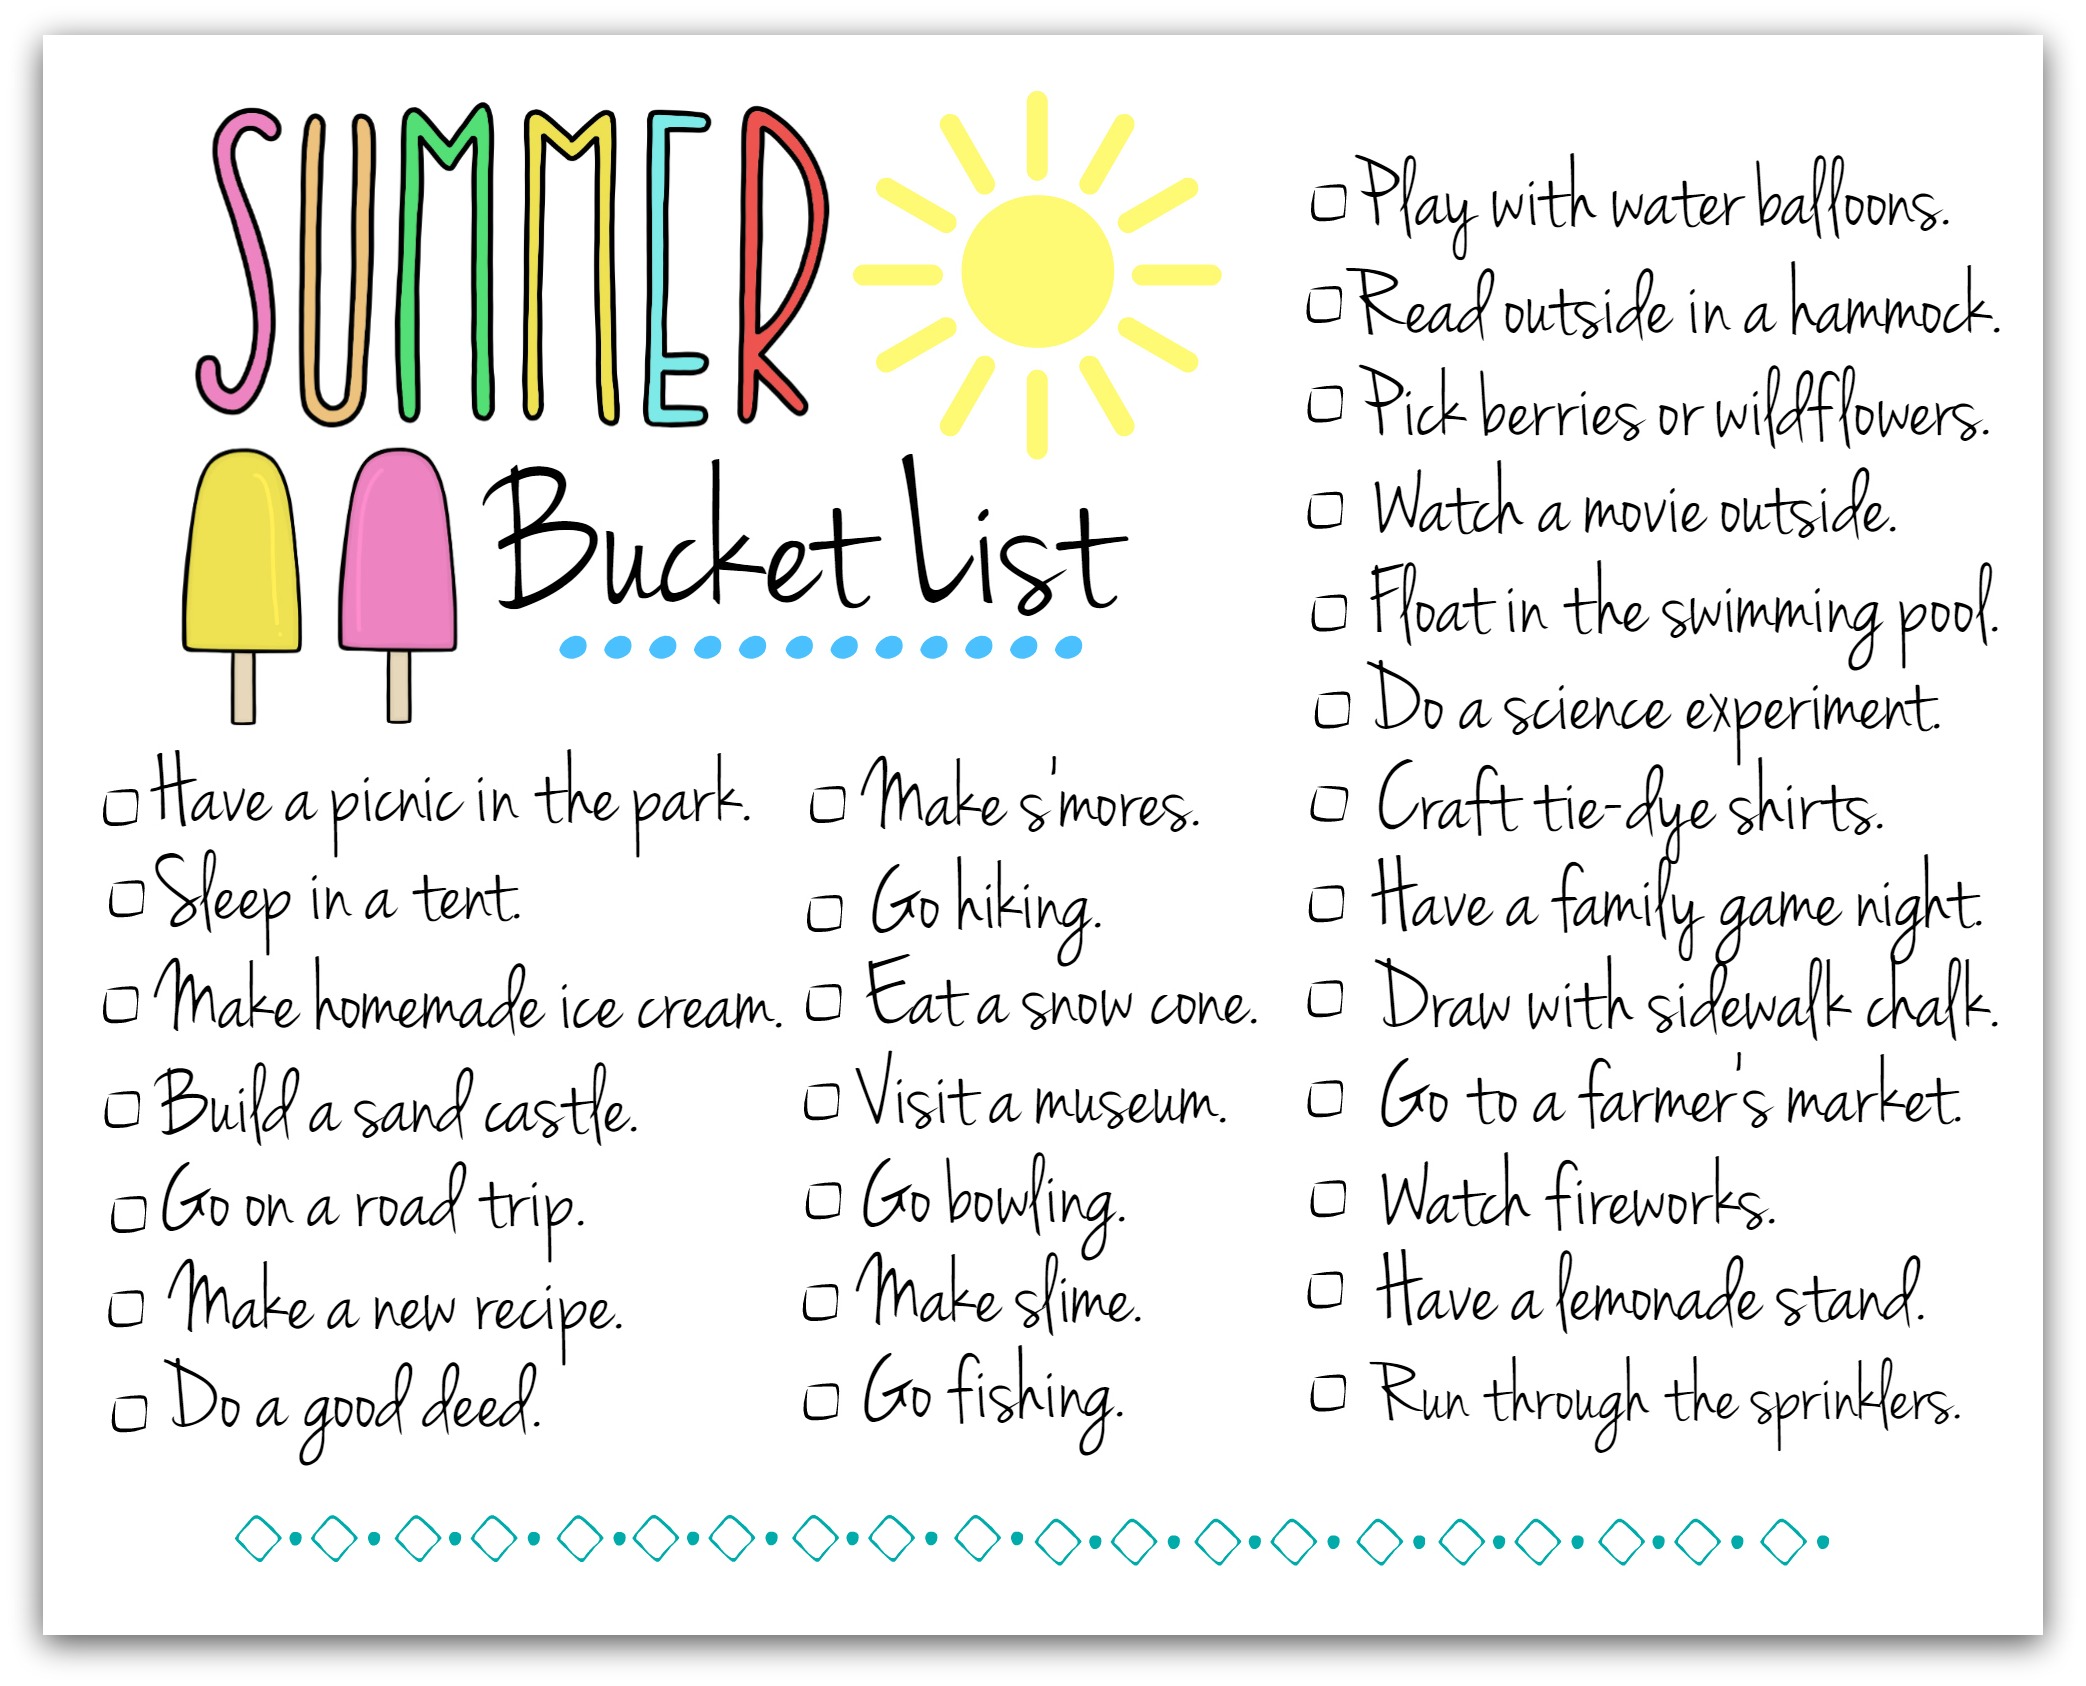 Print Our Summer Bucket List For Fun Activity Ideas (It's FREE!)